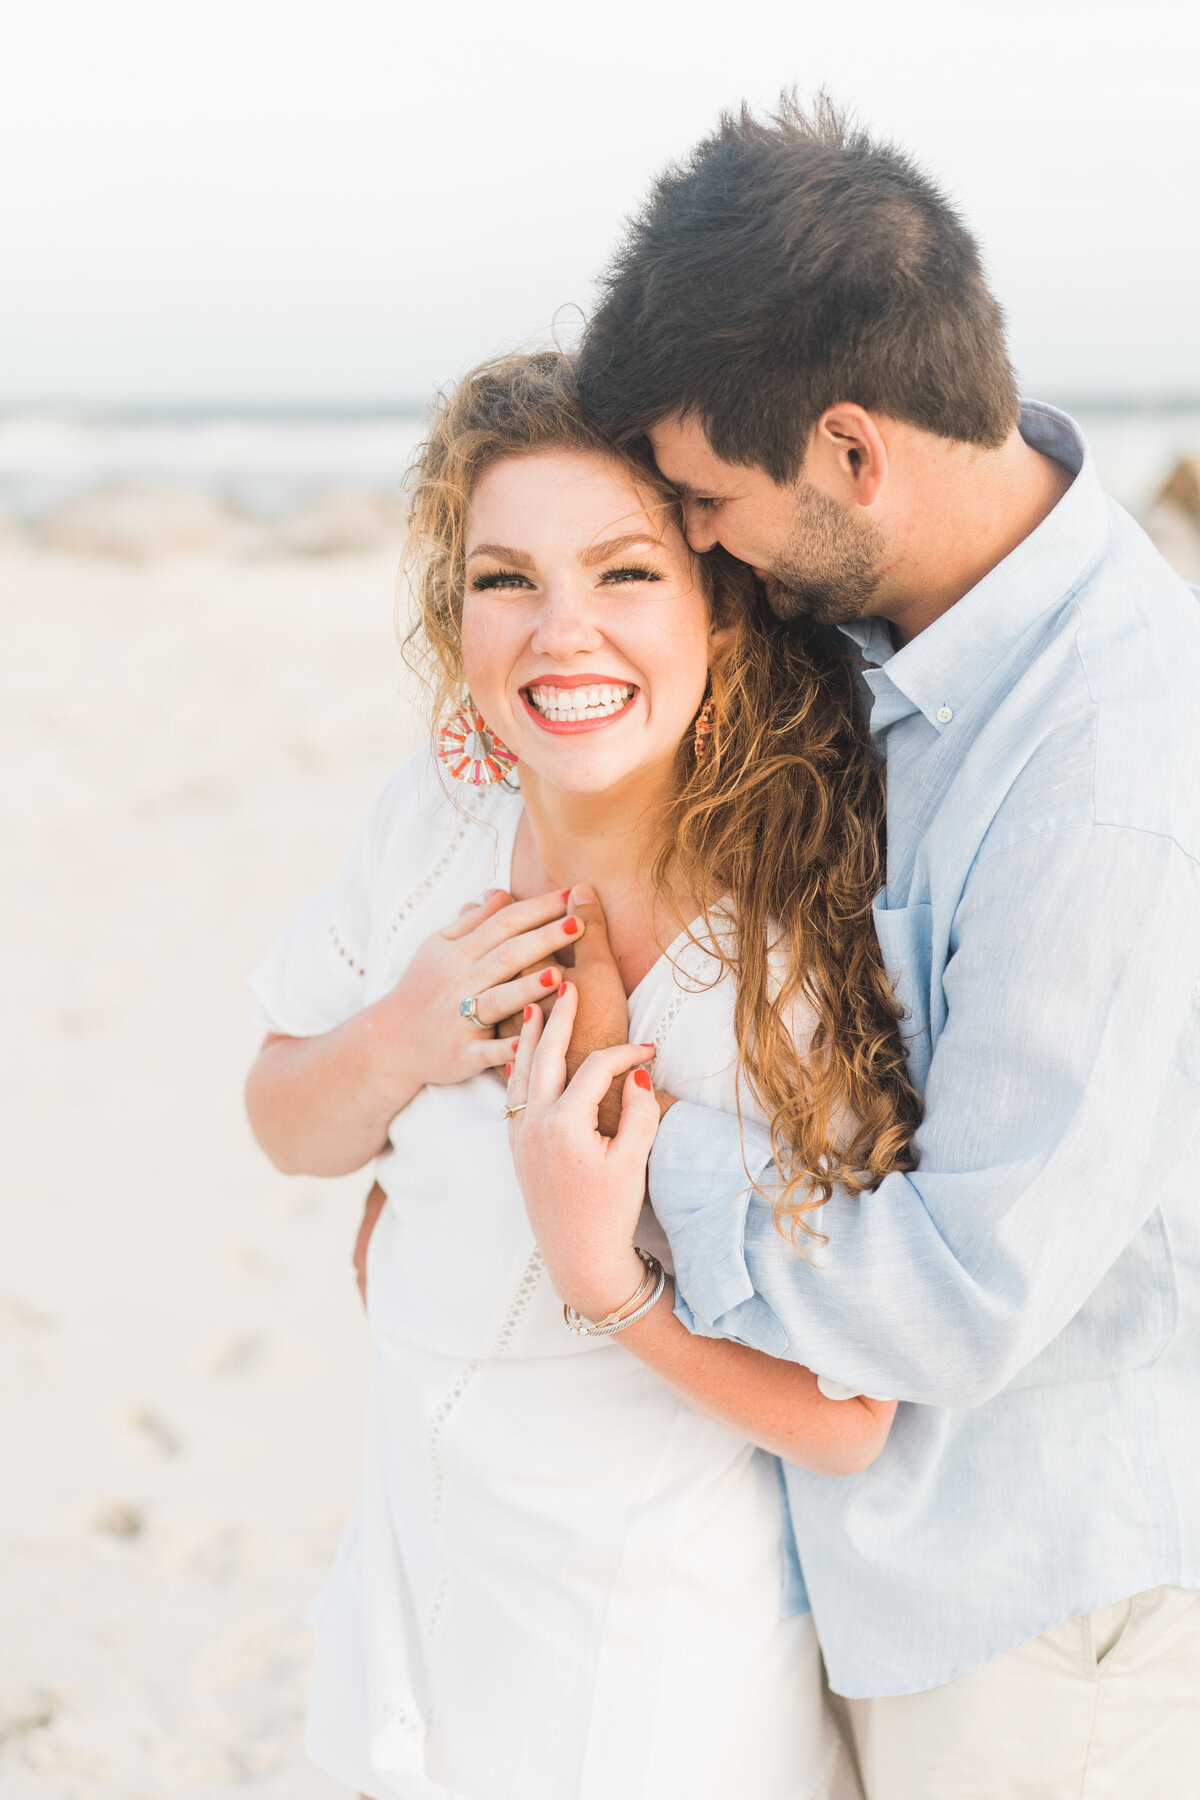 Engagement photoshoot on a beach in Alabama